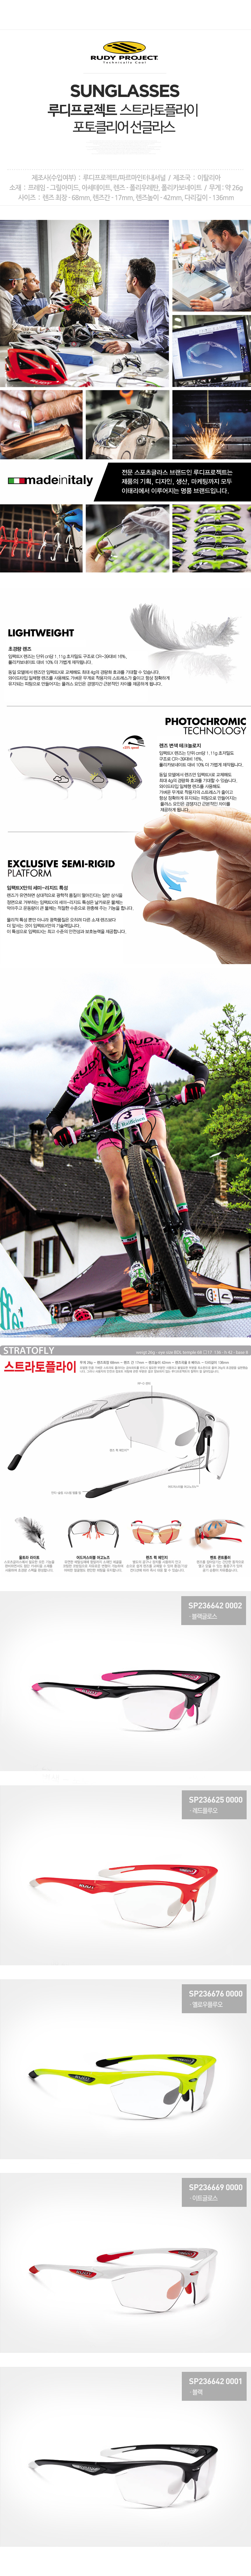 rudyproject_stratofly_photo_clear.jpg